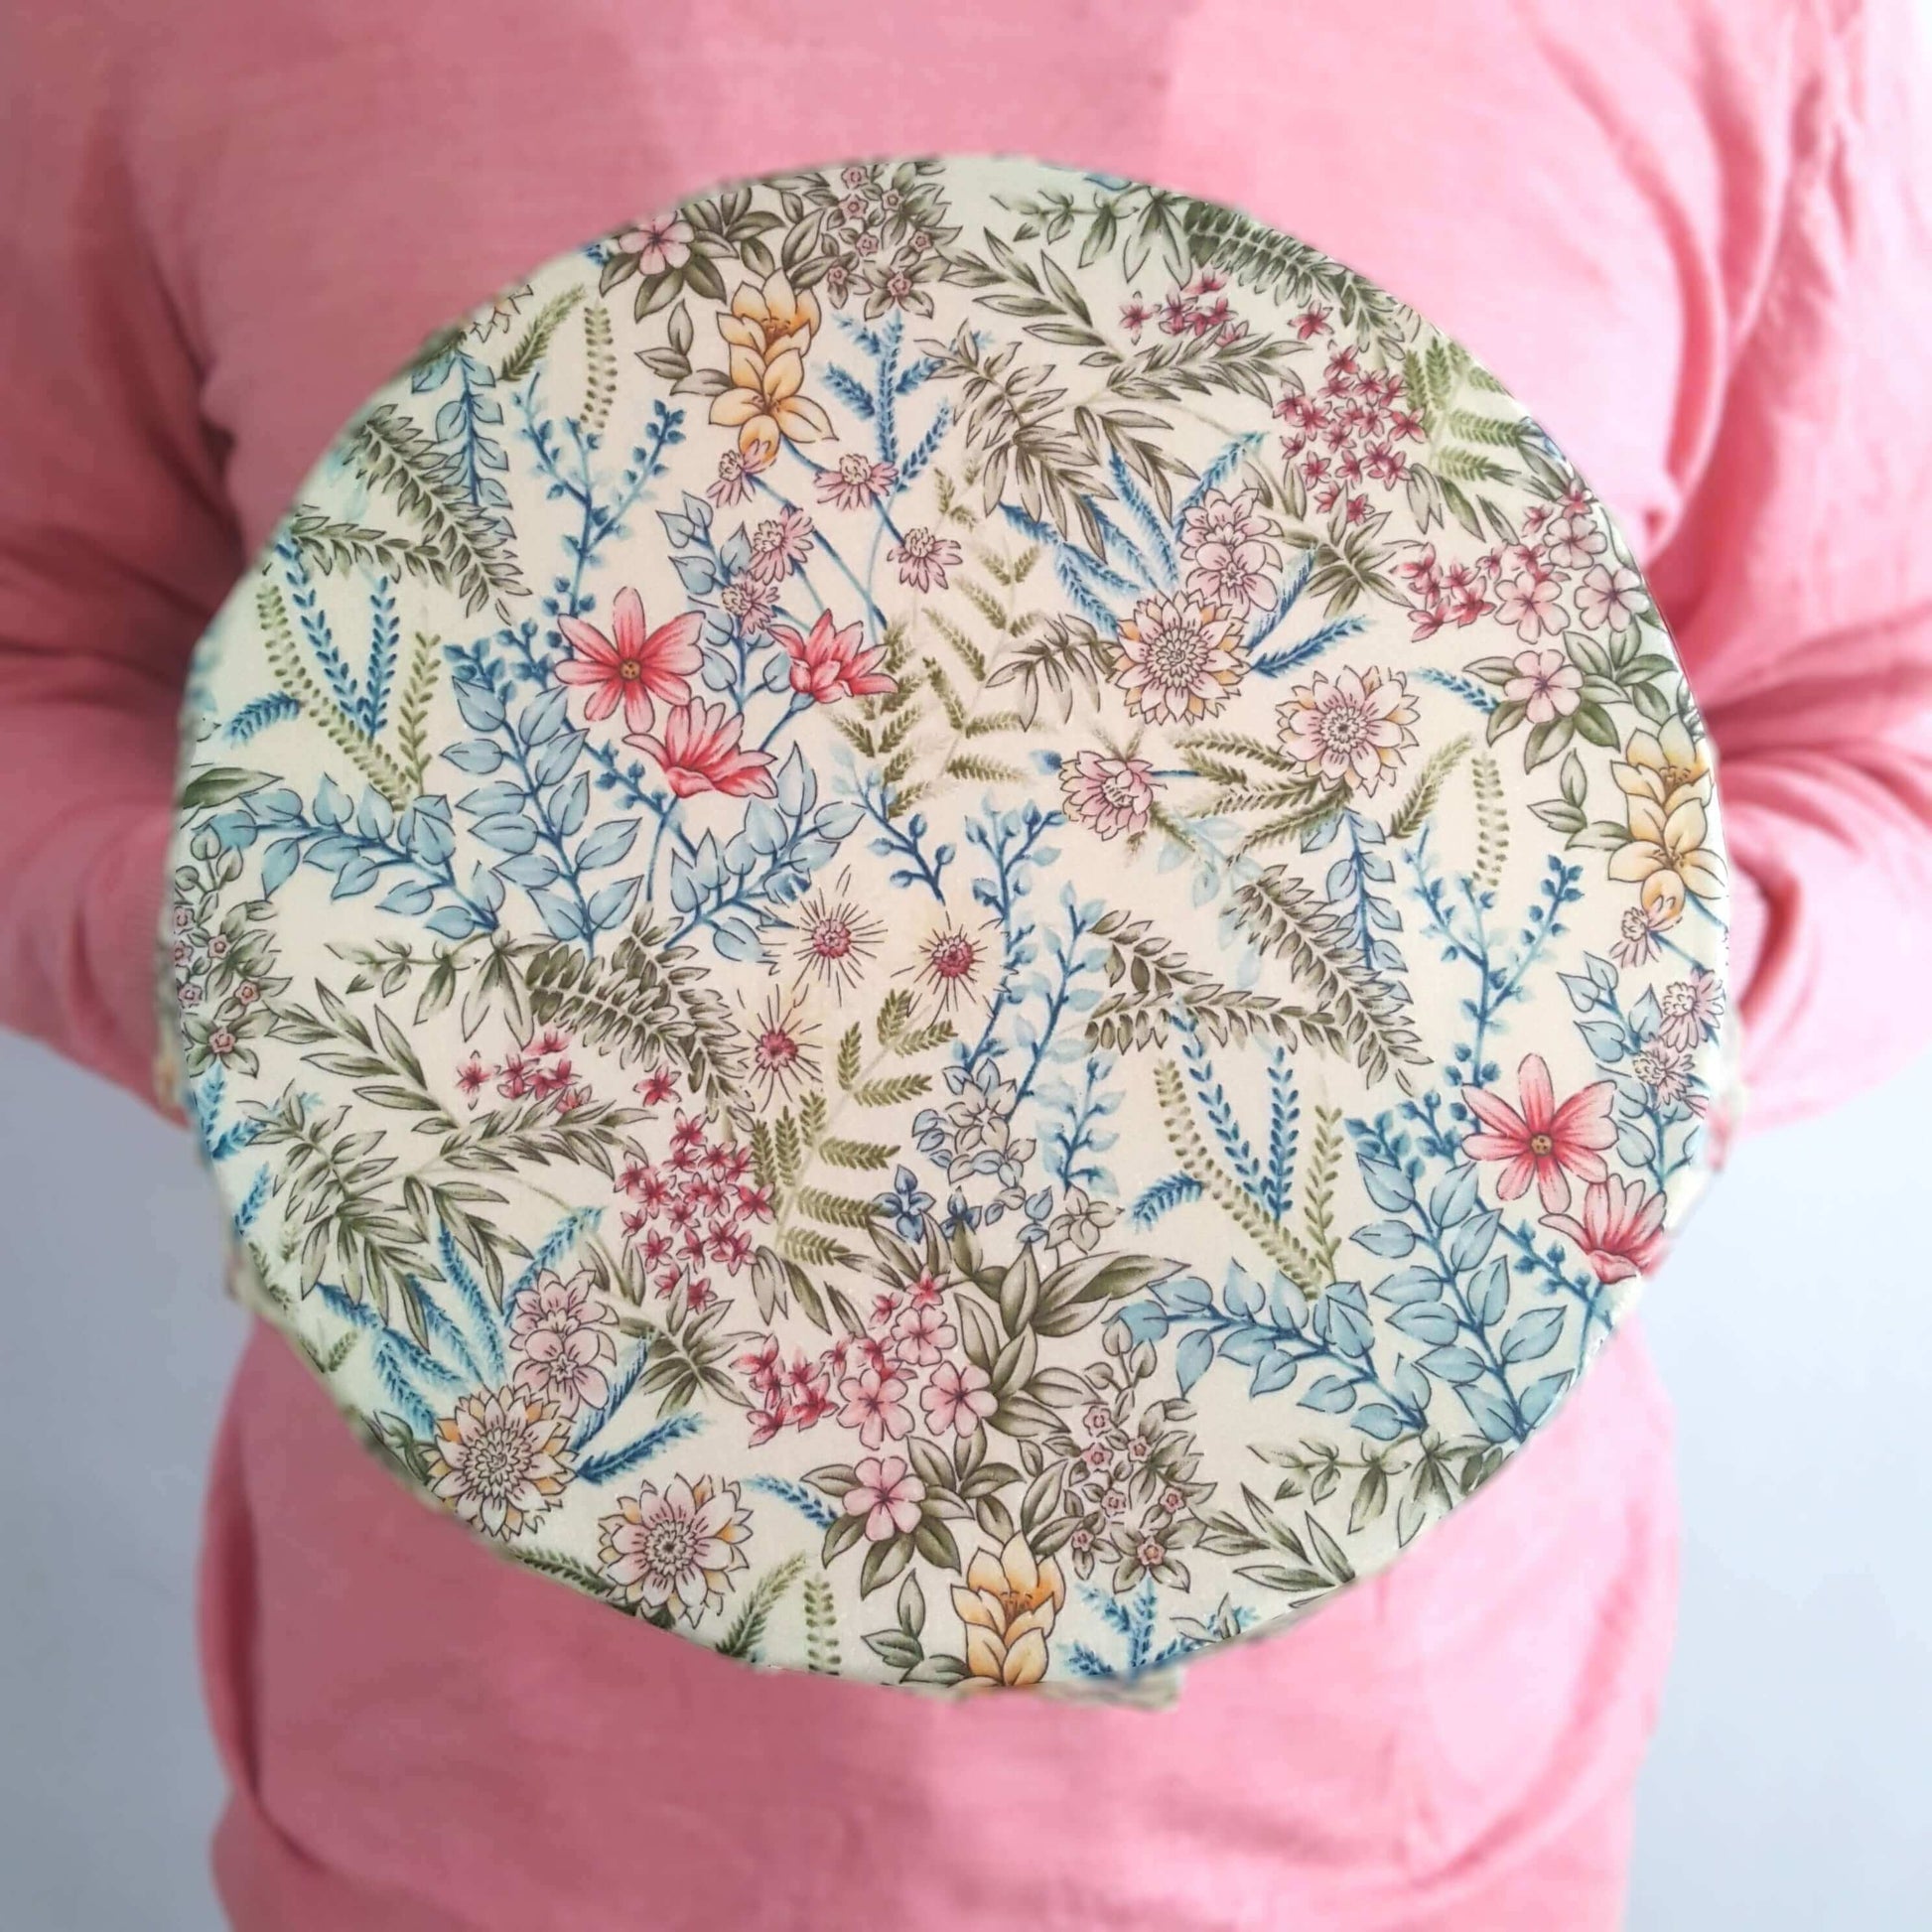 Botanical Earth Kind Sandwich & Bowl Set of 2 Large Beeswax Wraps on bowl